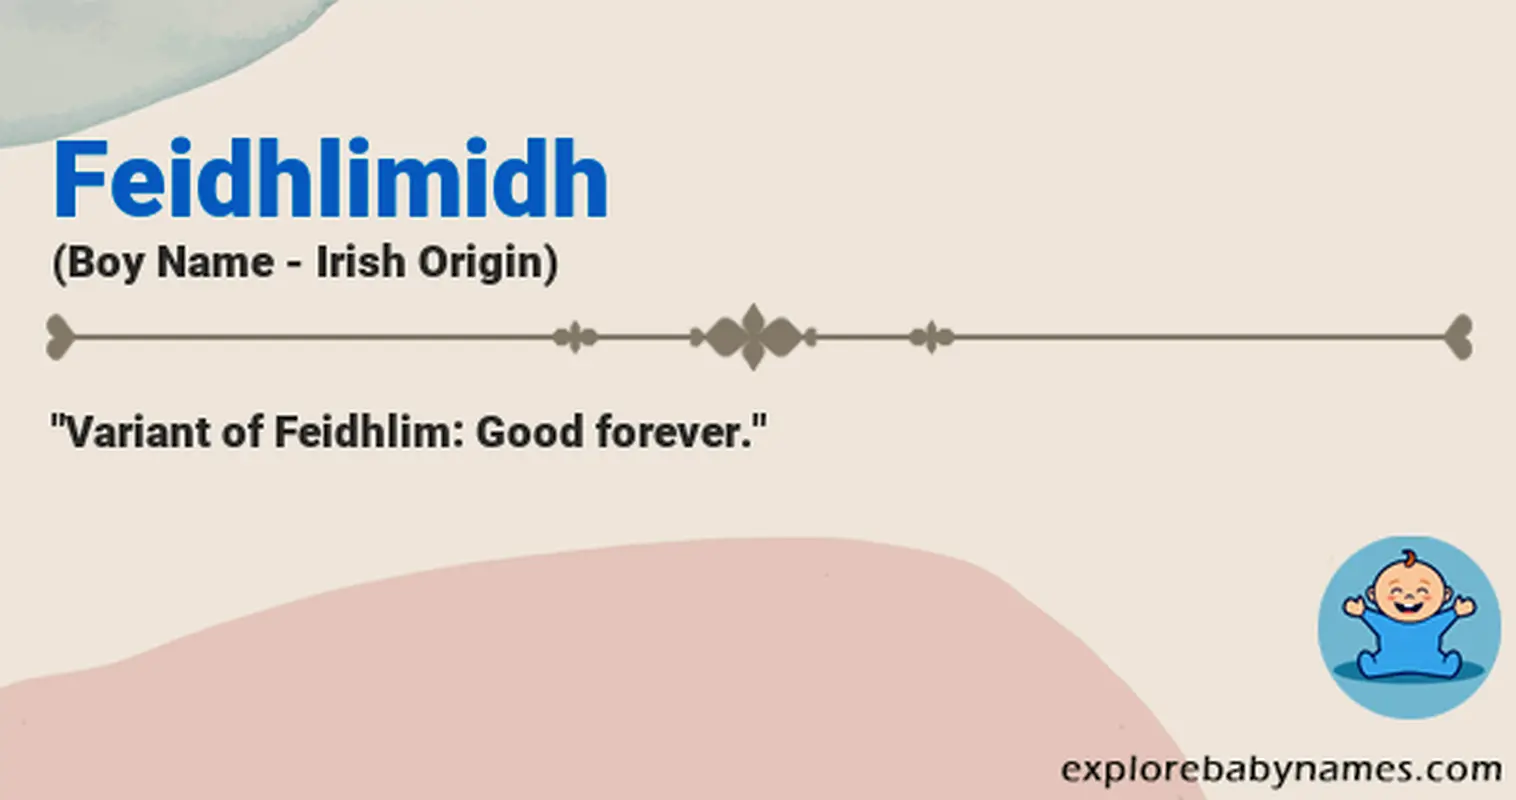 Meaning of Feidhlimidh